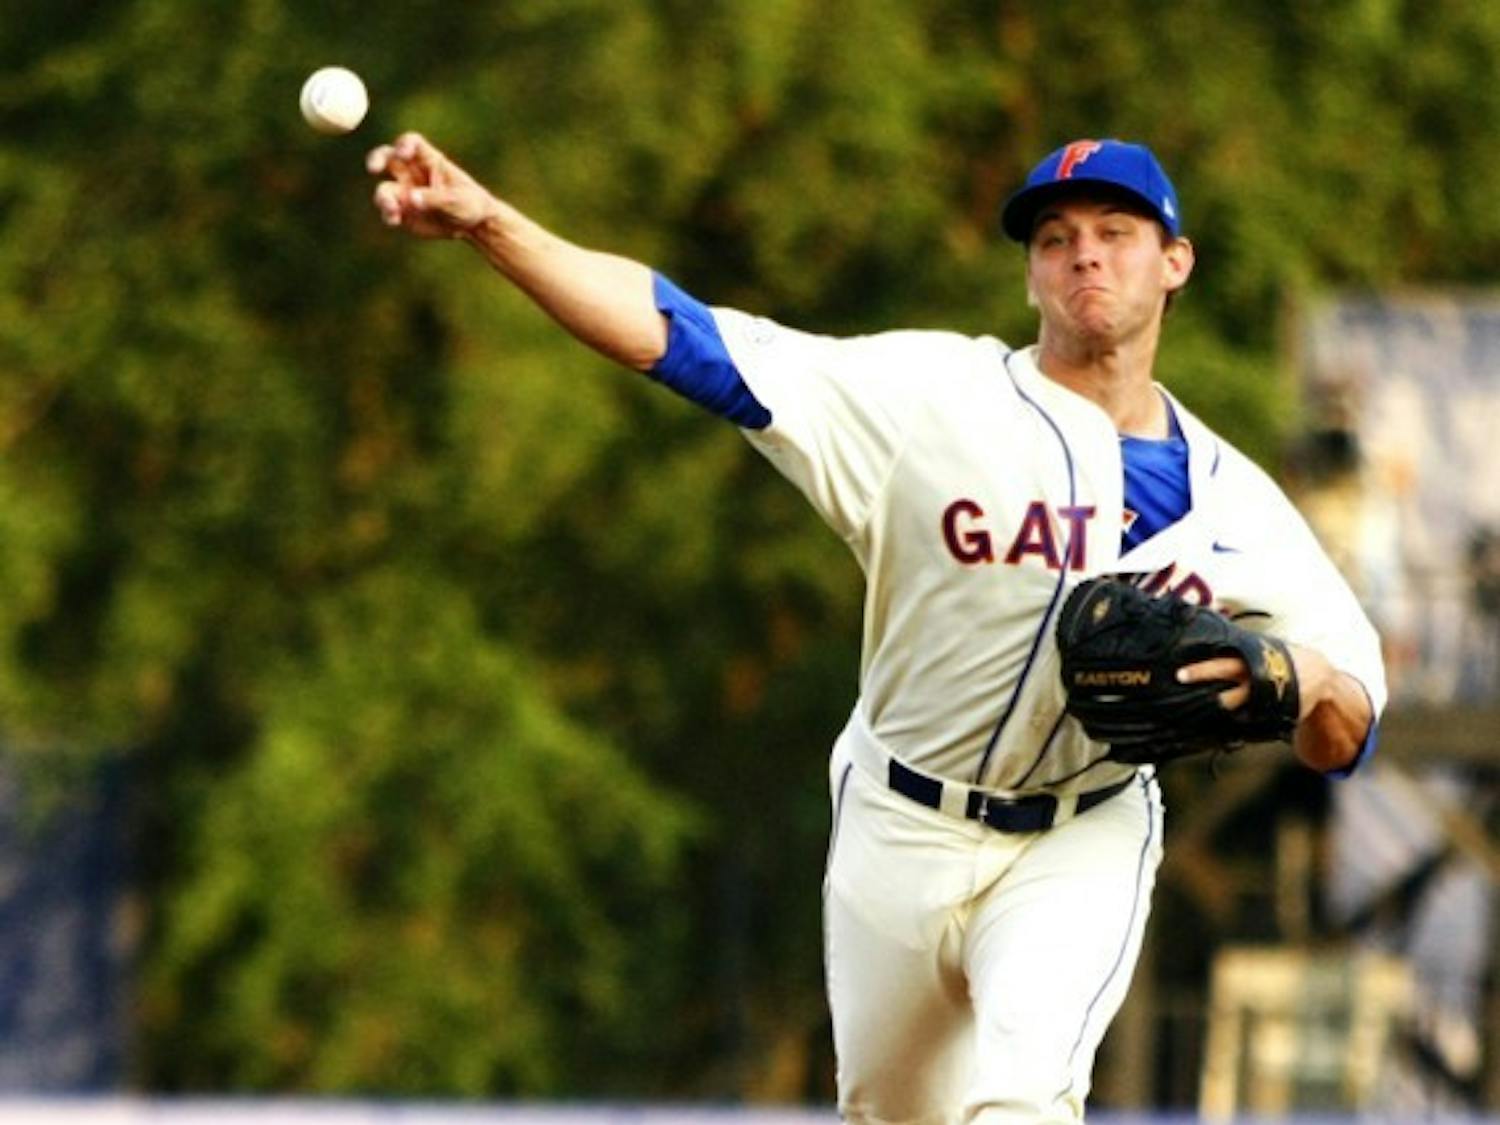 Jonathon Crawford tossed six scoreless innings in the Gators' 7-0 victory against the Tigers Friday night in Gainesville.